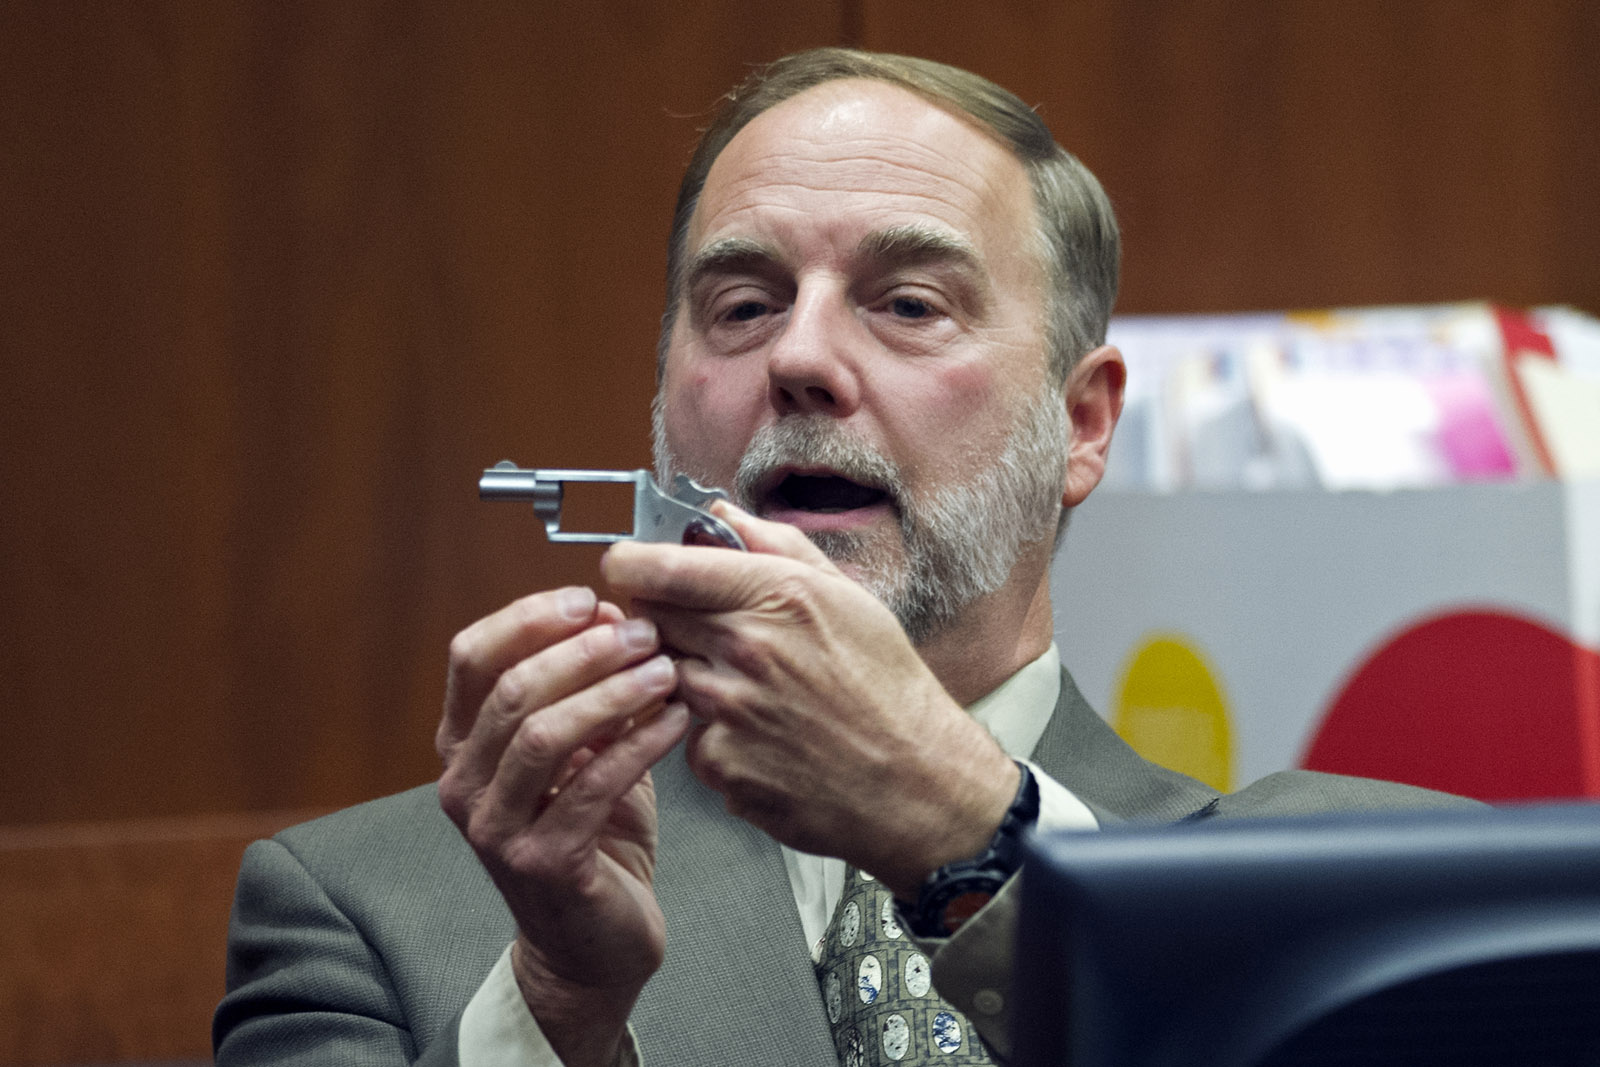 Julien J. Mason, Jr., forensic firearms and tool mark examiner, Virginia Department of Forensic Science, holds a North American Arms .22LR five-shot revolver while providing testimony in the Charles Severance trial, Tuesday, Oct. 20, 2015, at the Fairfax County Circuit County in Fairfax, Va. Severance is accused of three murders over the course of a decade in Alexandria, Va.  (AP Photo/Cliff Owen, Pool)